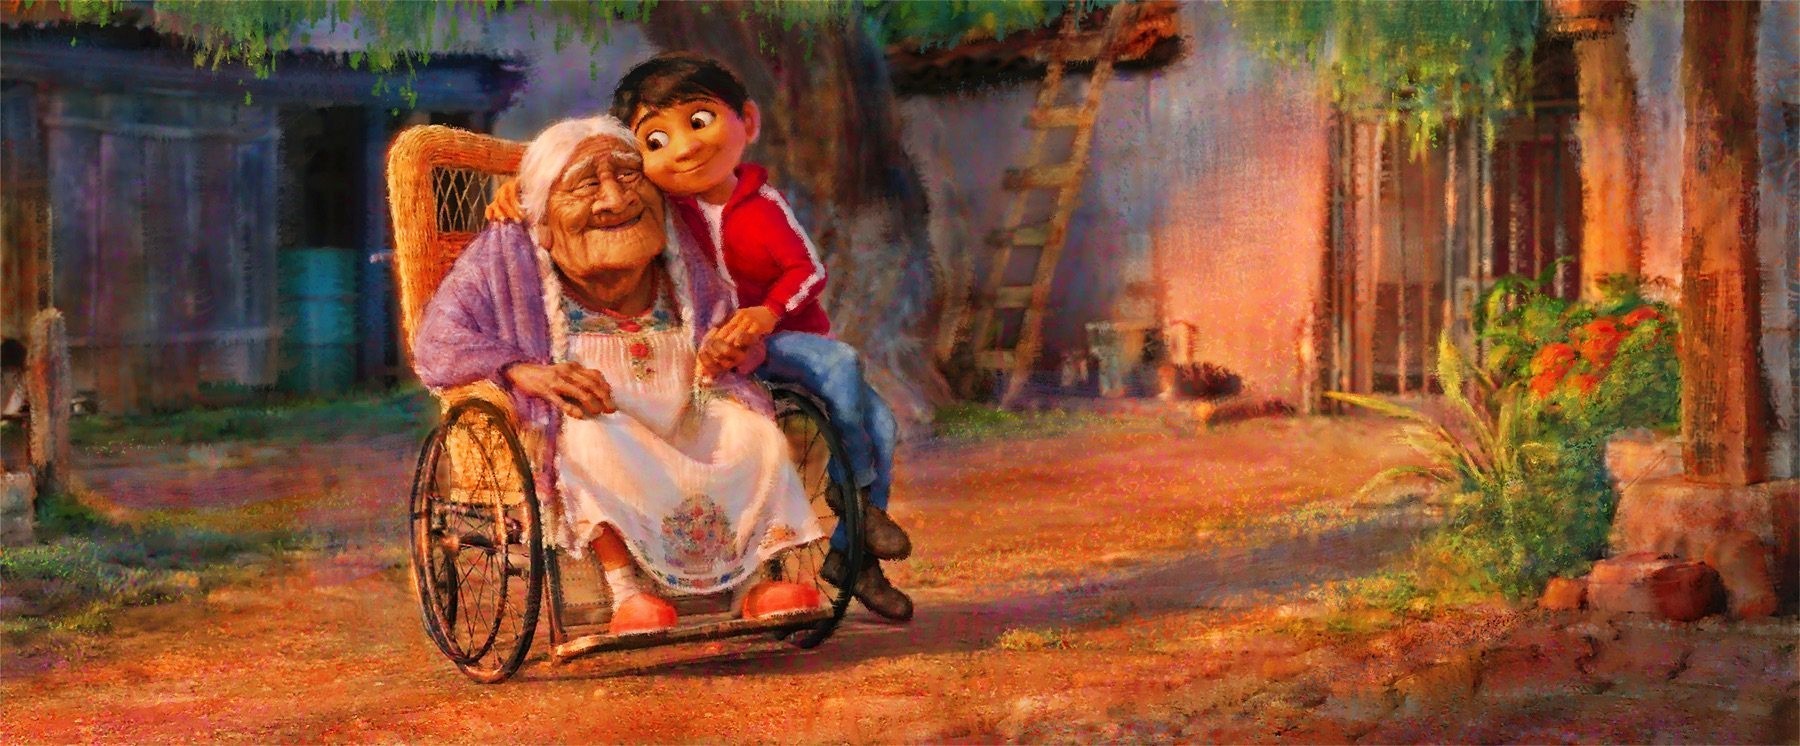 Miguel from Walt Disney Pictures' Coco (2017)